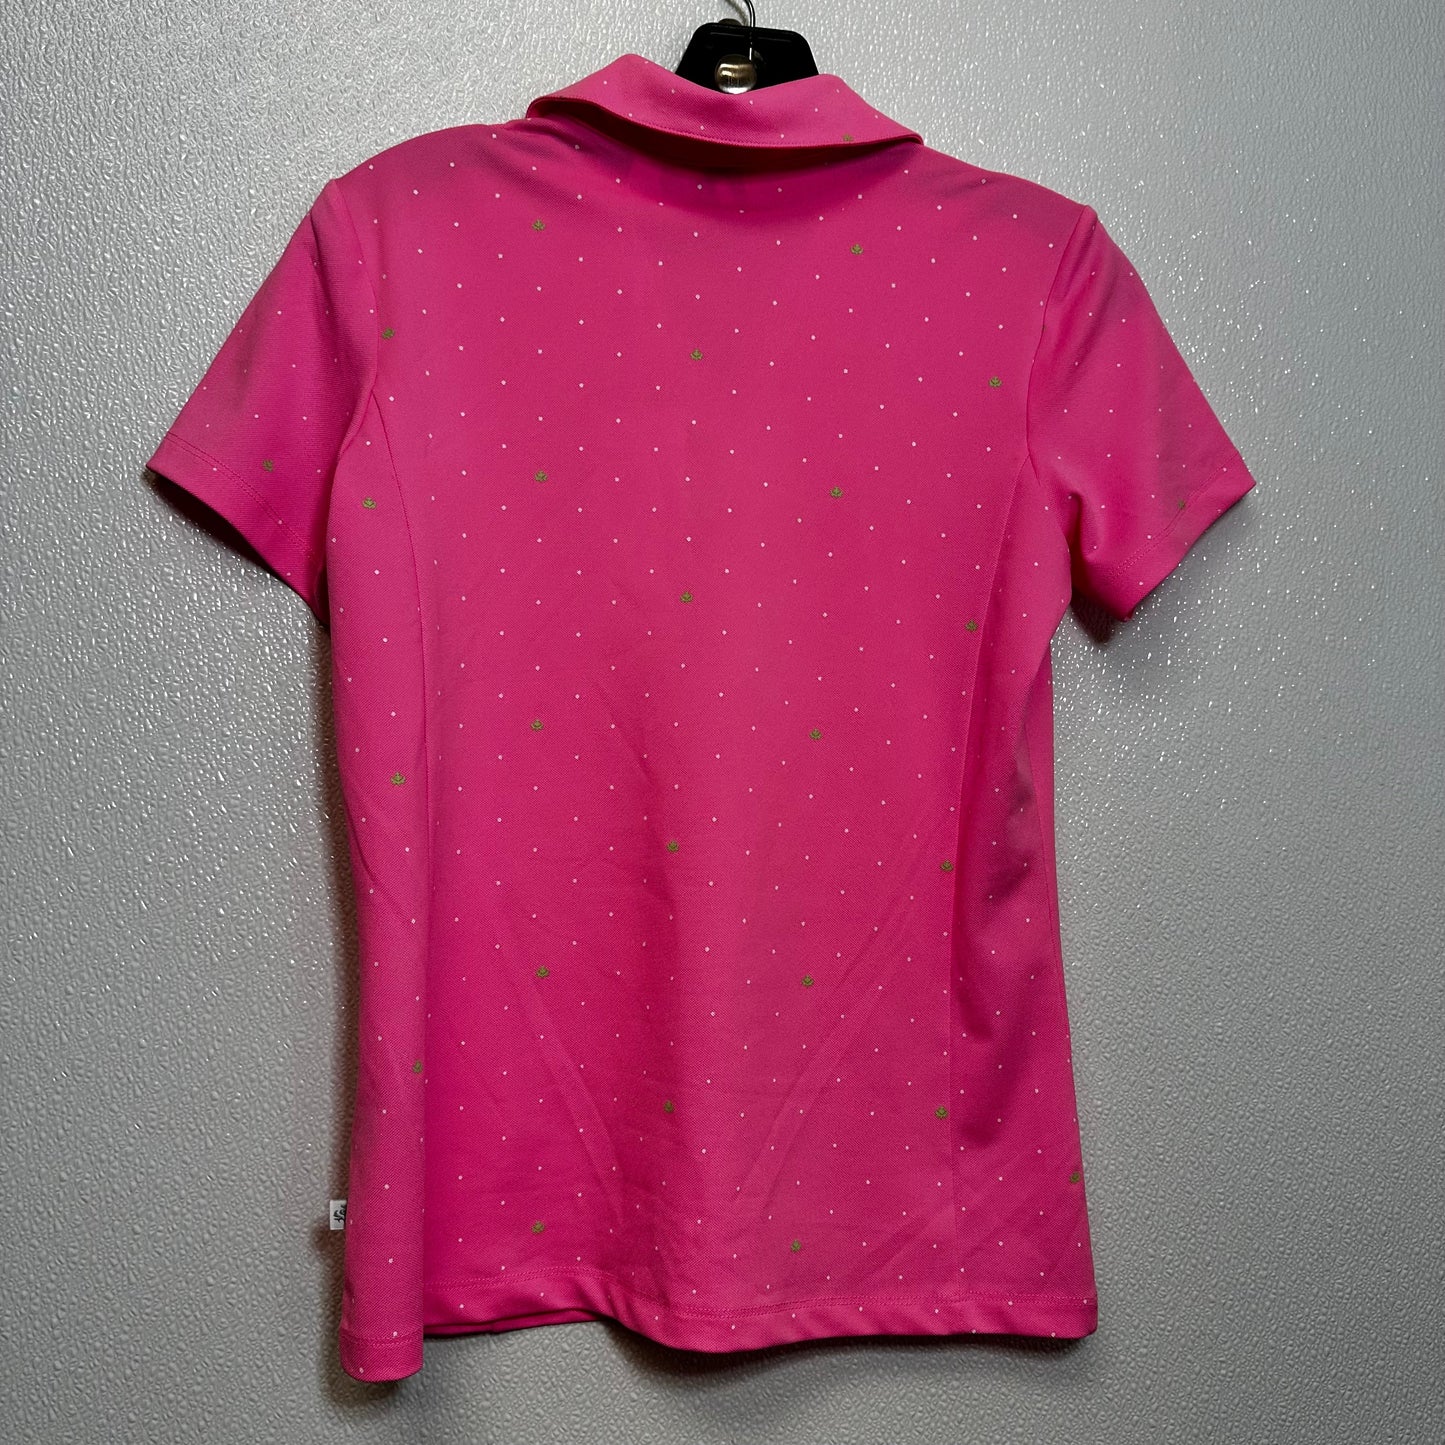 Pink Athletic Top Short Sleeve Lady Hagen, Size Xs